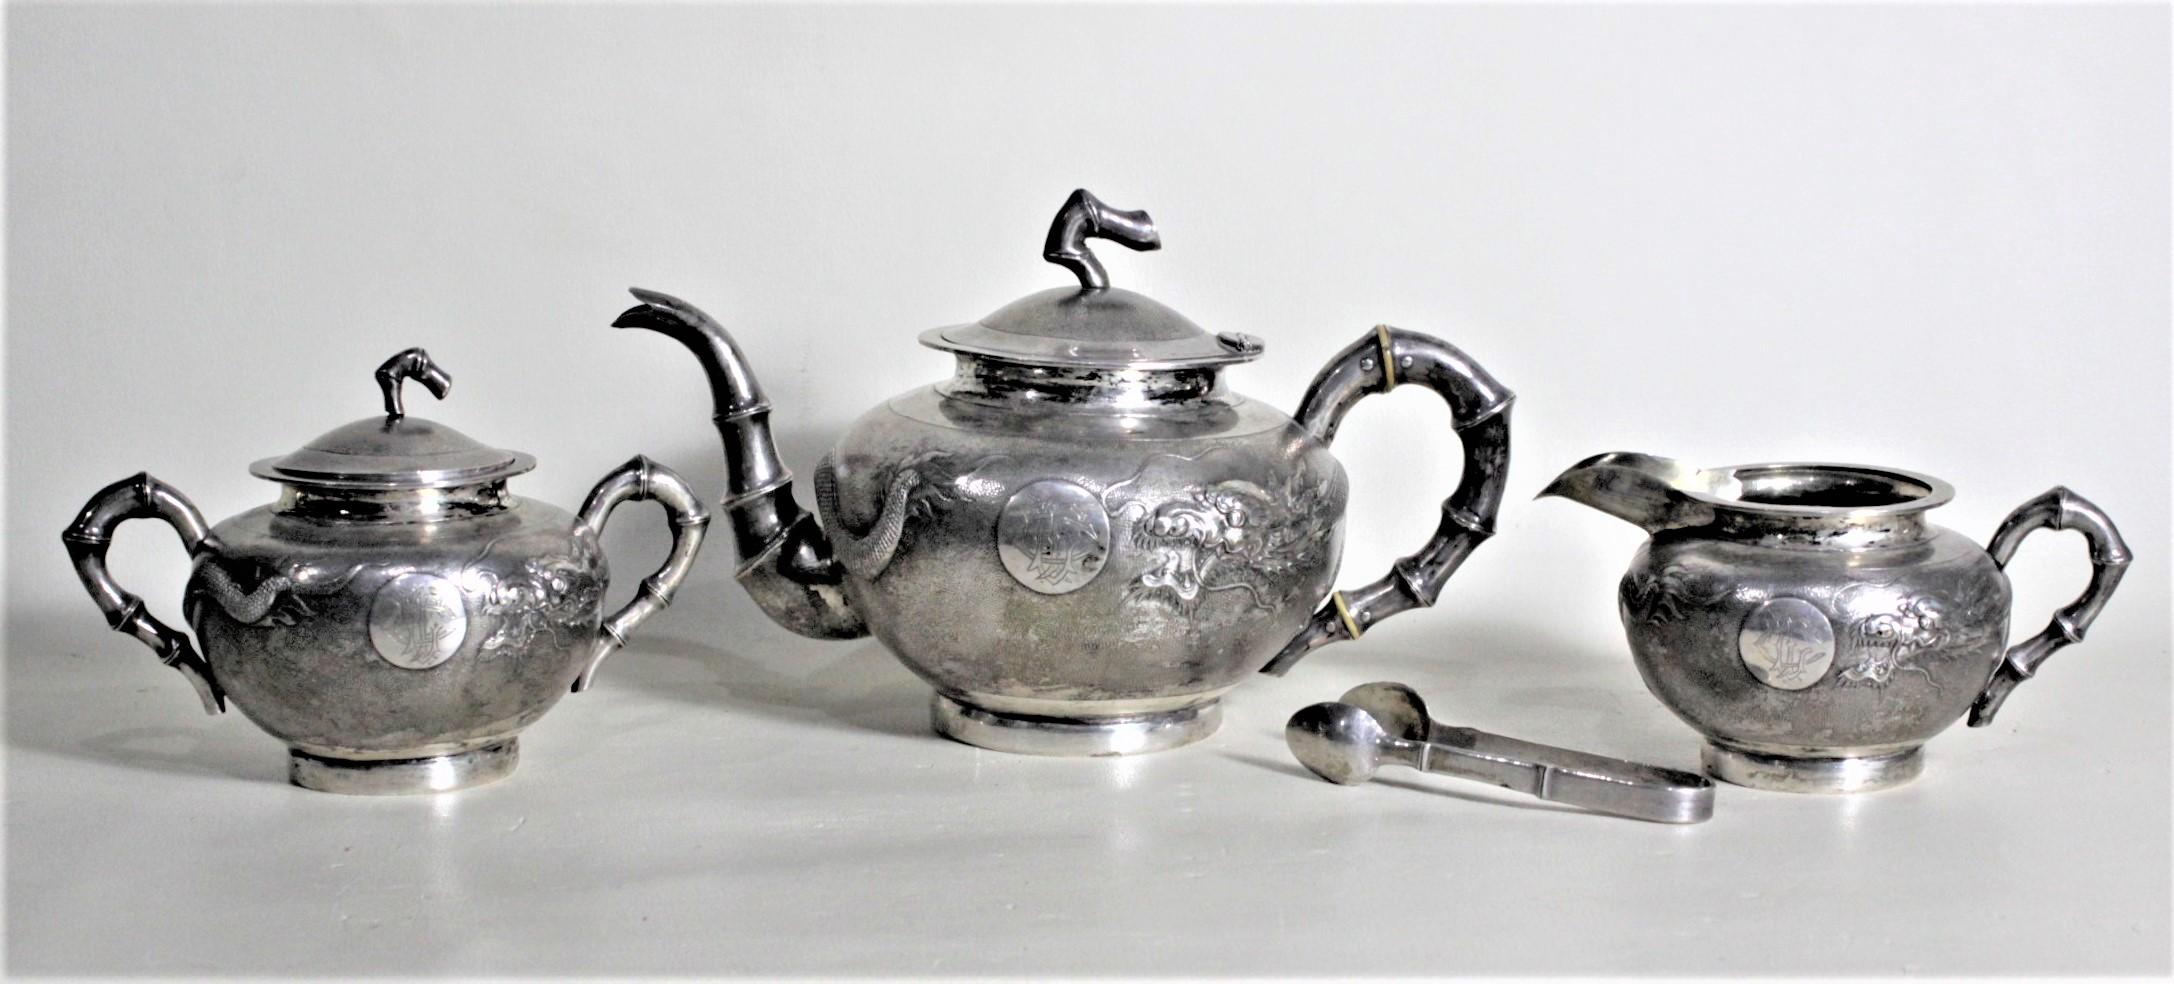 This antique handcrafted sterling silver tea set was made in China in circa 1880 in the period Chinese export style. The set is composed of a teapot, creamer and lidded sugar bowl and a set of thongs. Each piece of the set has a very detailed chased